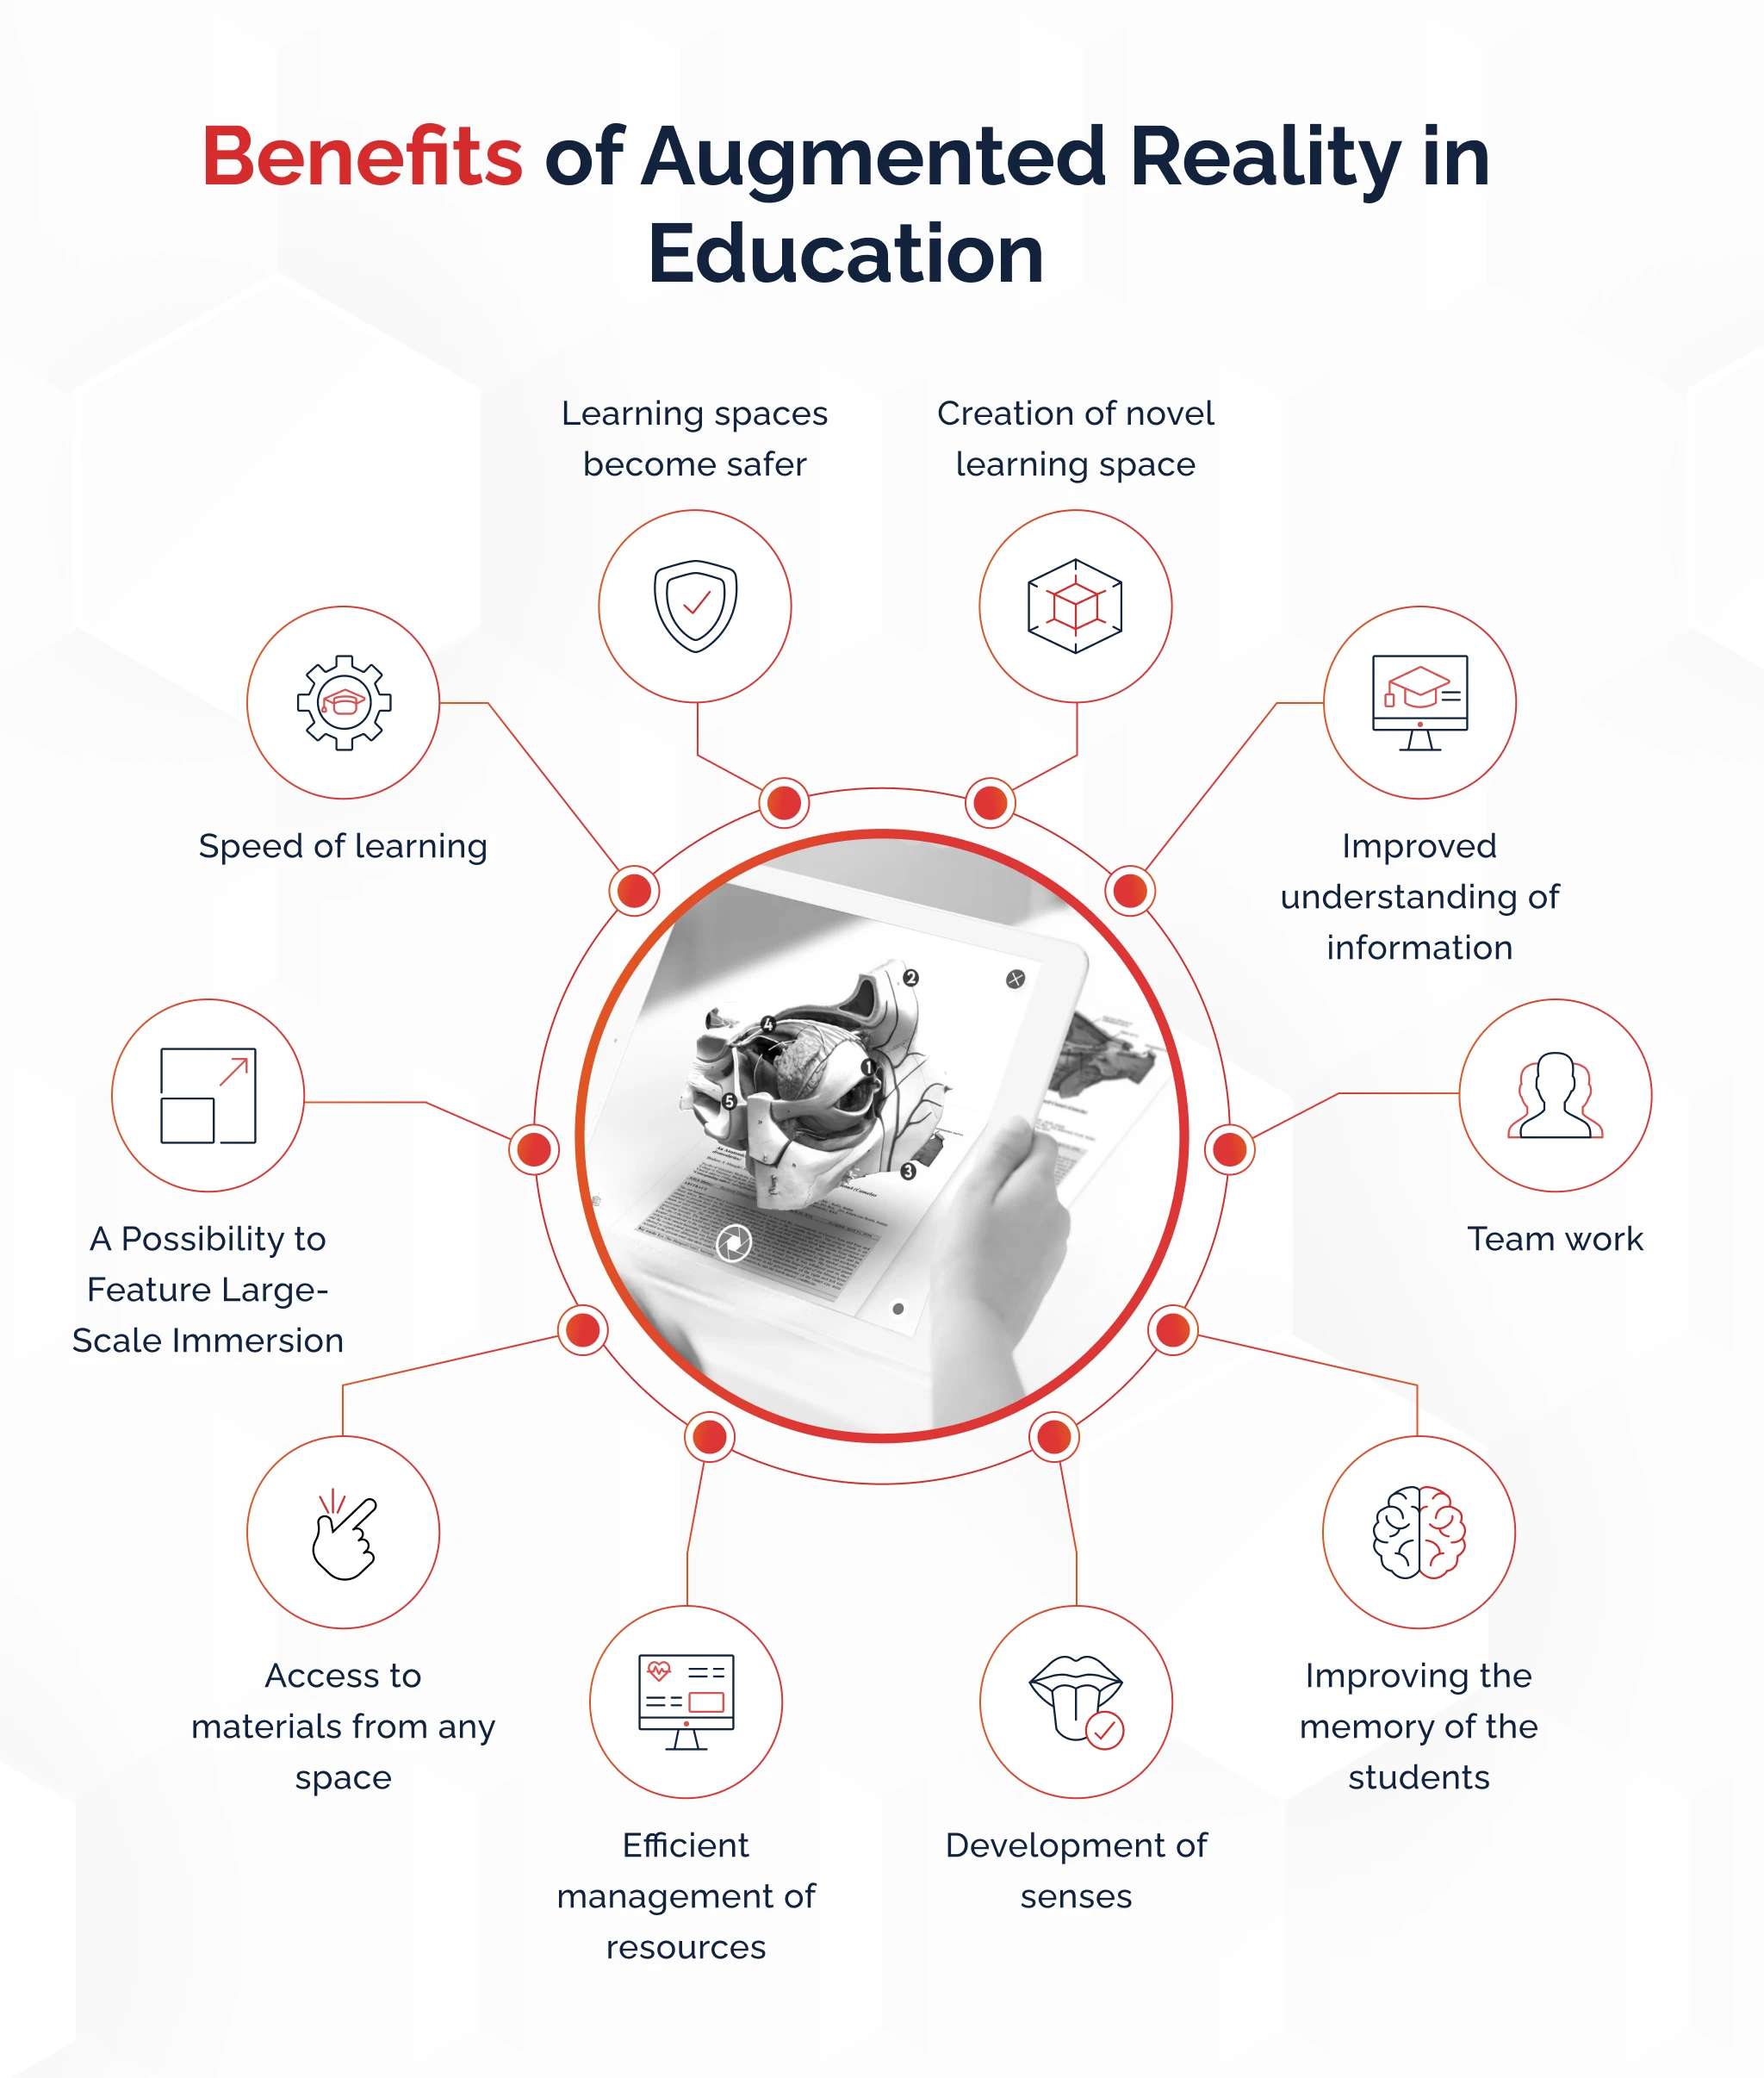 Benefits of Augmented Reality in Education